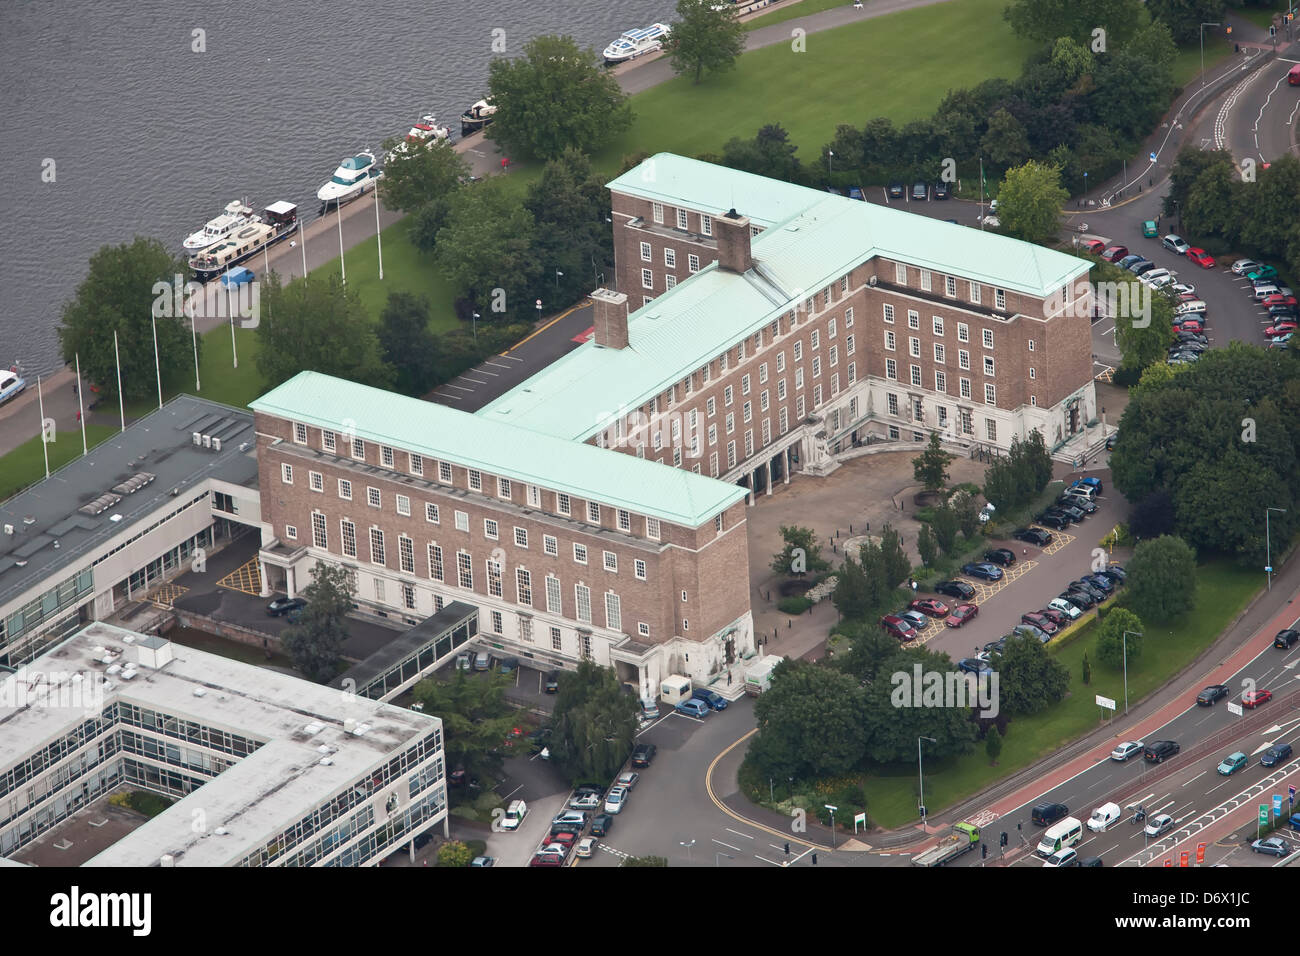 Overhead view of the Nottinghamshire county council offices in West Bridgford, Nottingham. Stock Photo